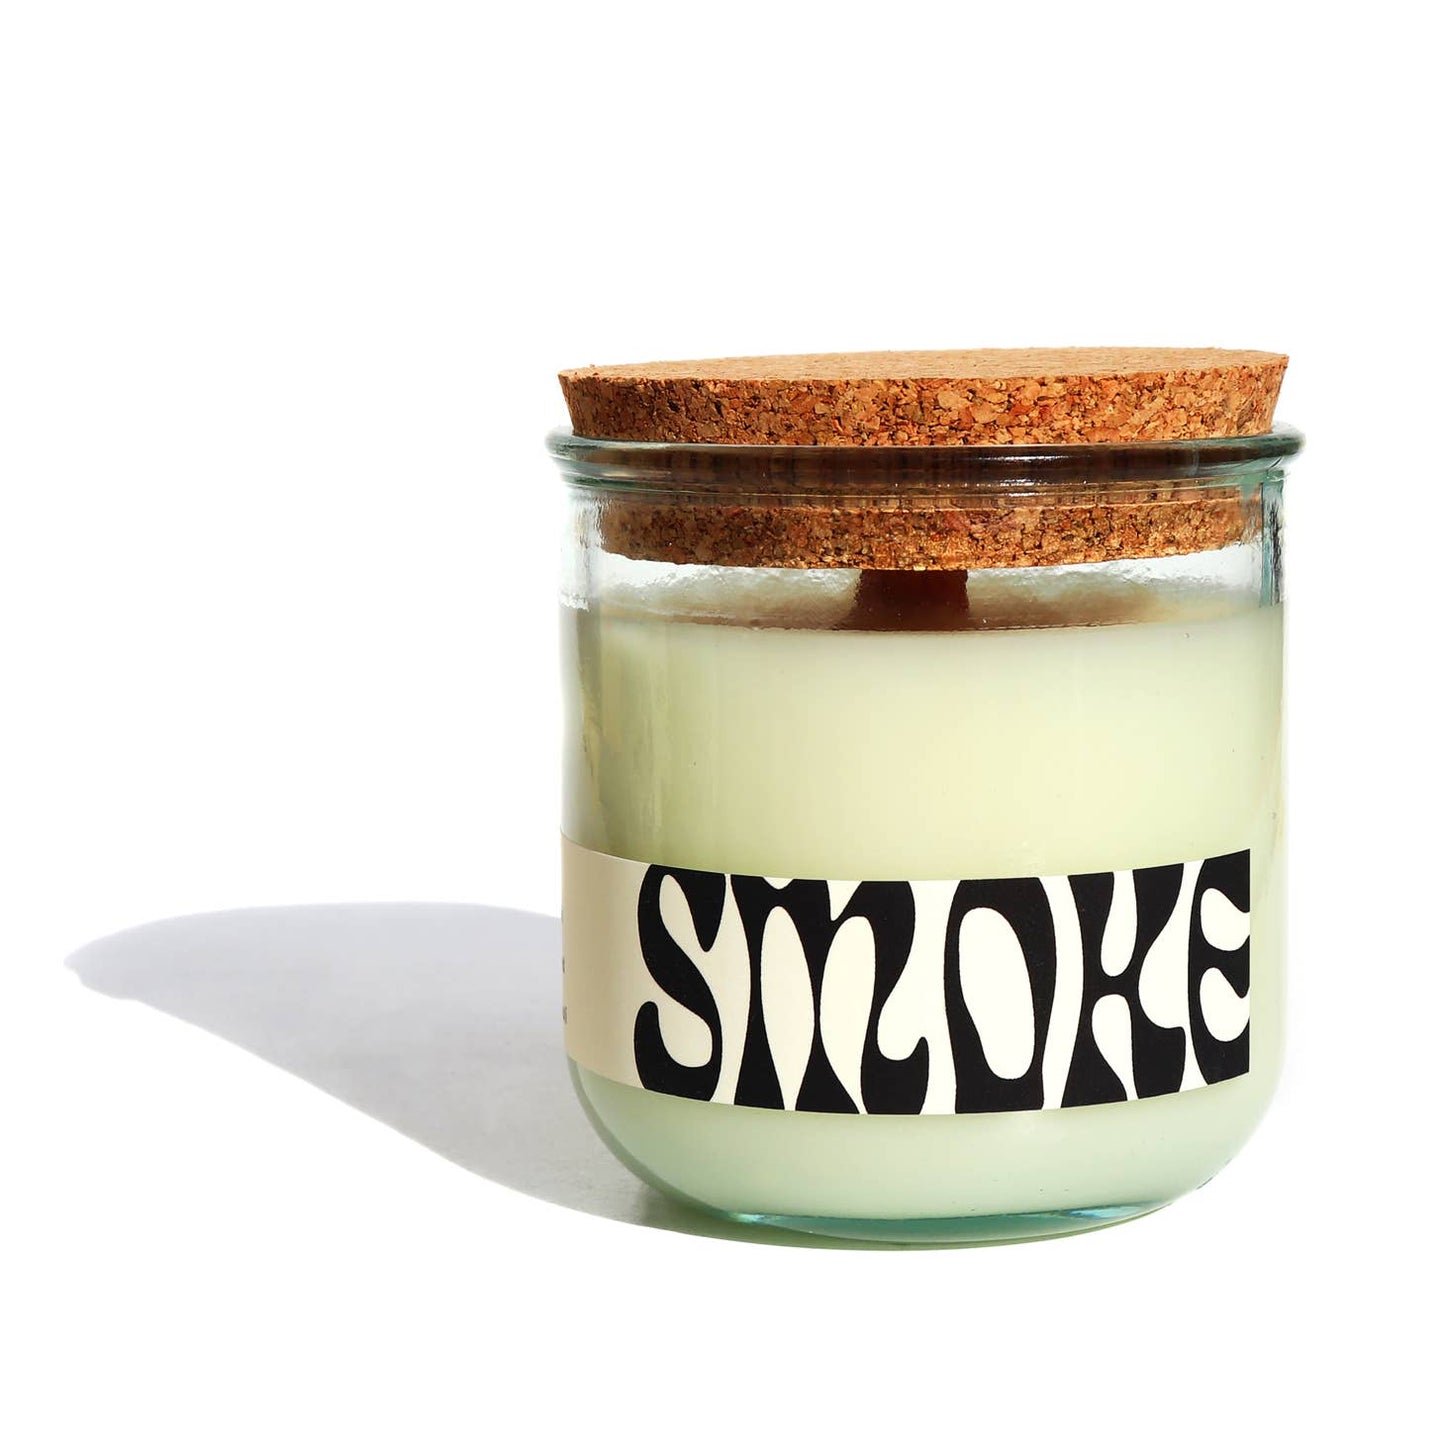 often wander california element candle smoke , Imagine charred wood after a bonfire... Burning and crackling in a stove or bond fire.  Ignite your senses with notes of oud, cypress, redwood, and patchouli.  Clean and slow burning, these 9 ounce smooth and creamy soy candles have a 60 hour burn time. vegan, soy wax, recycled glass, bpa free wick, paraben free, etc